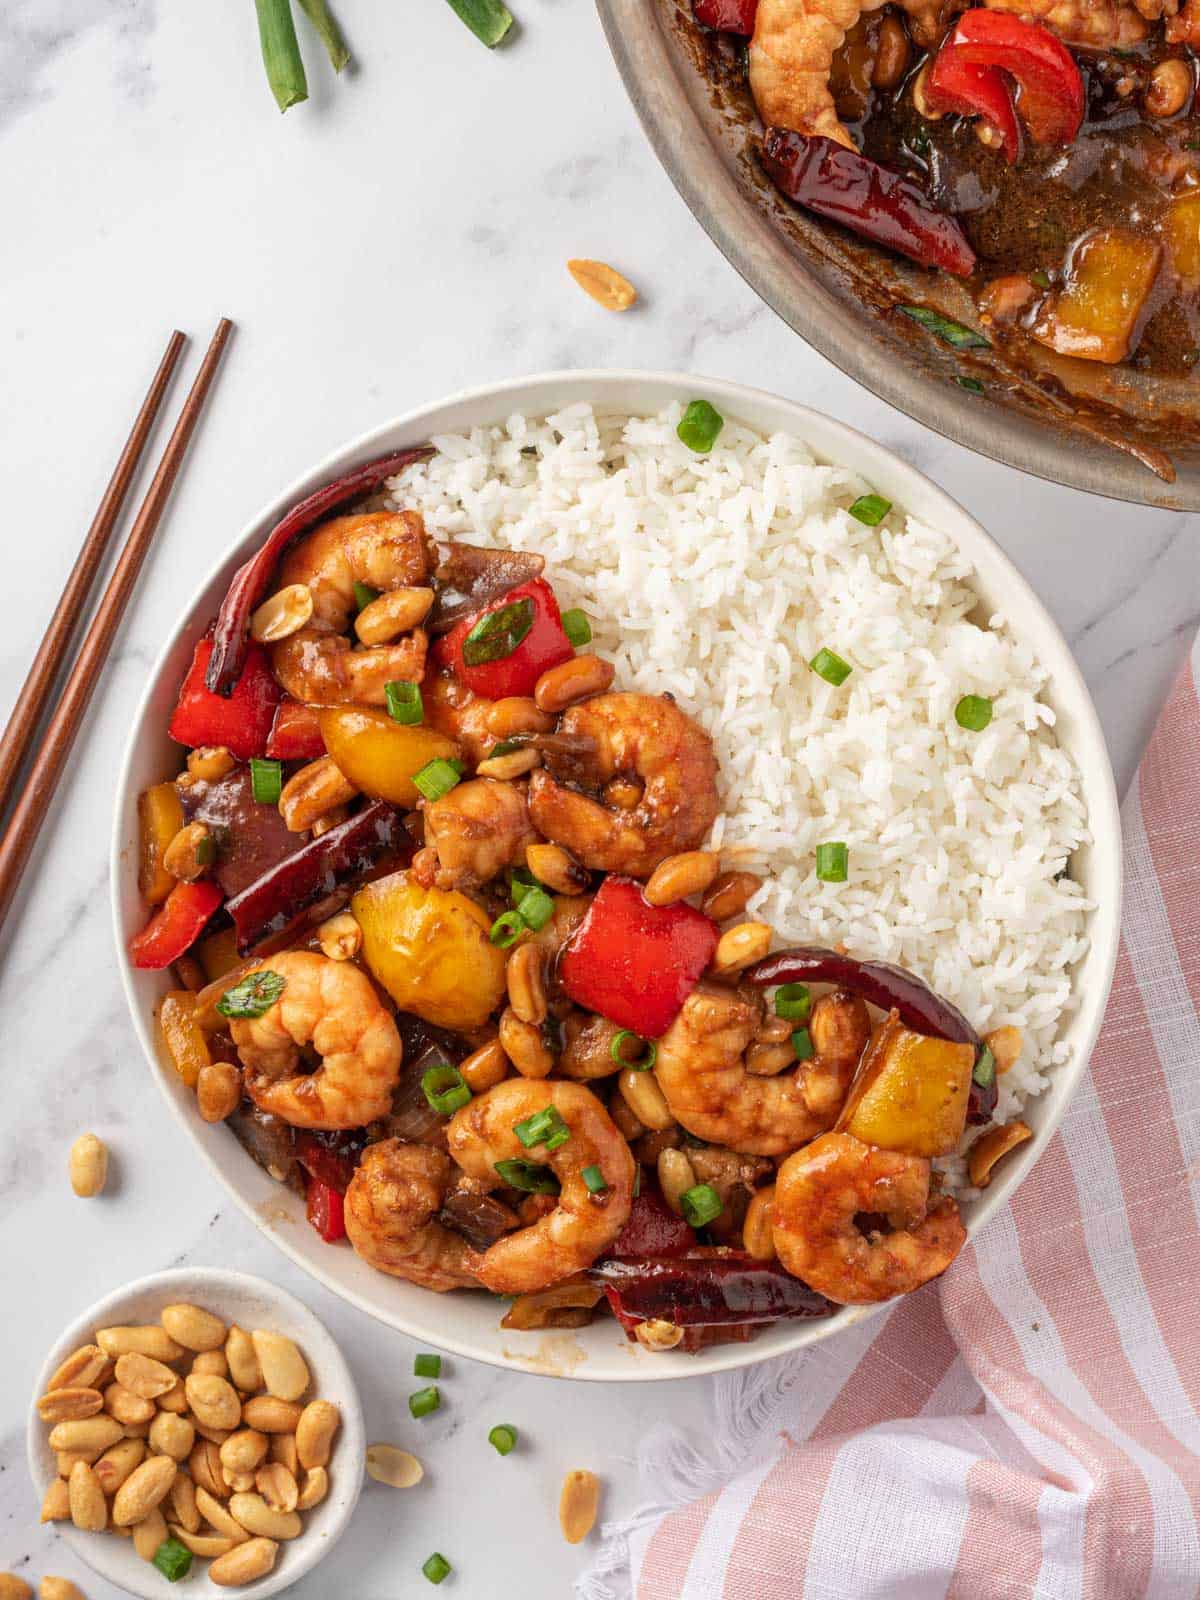 Kung pao shrimp recipe in a bowl with rice and chopsticks on the rice.